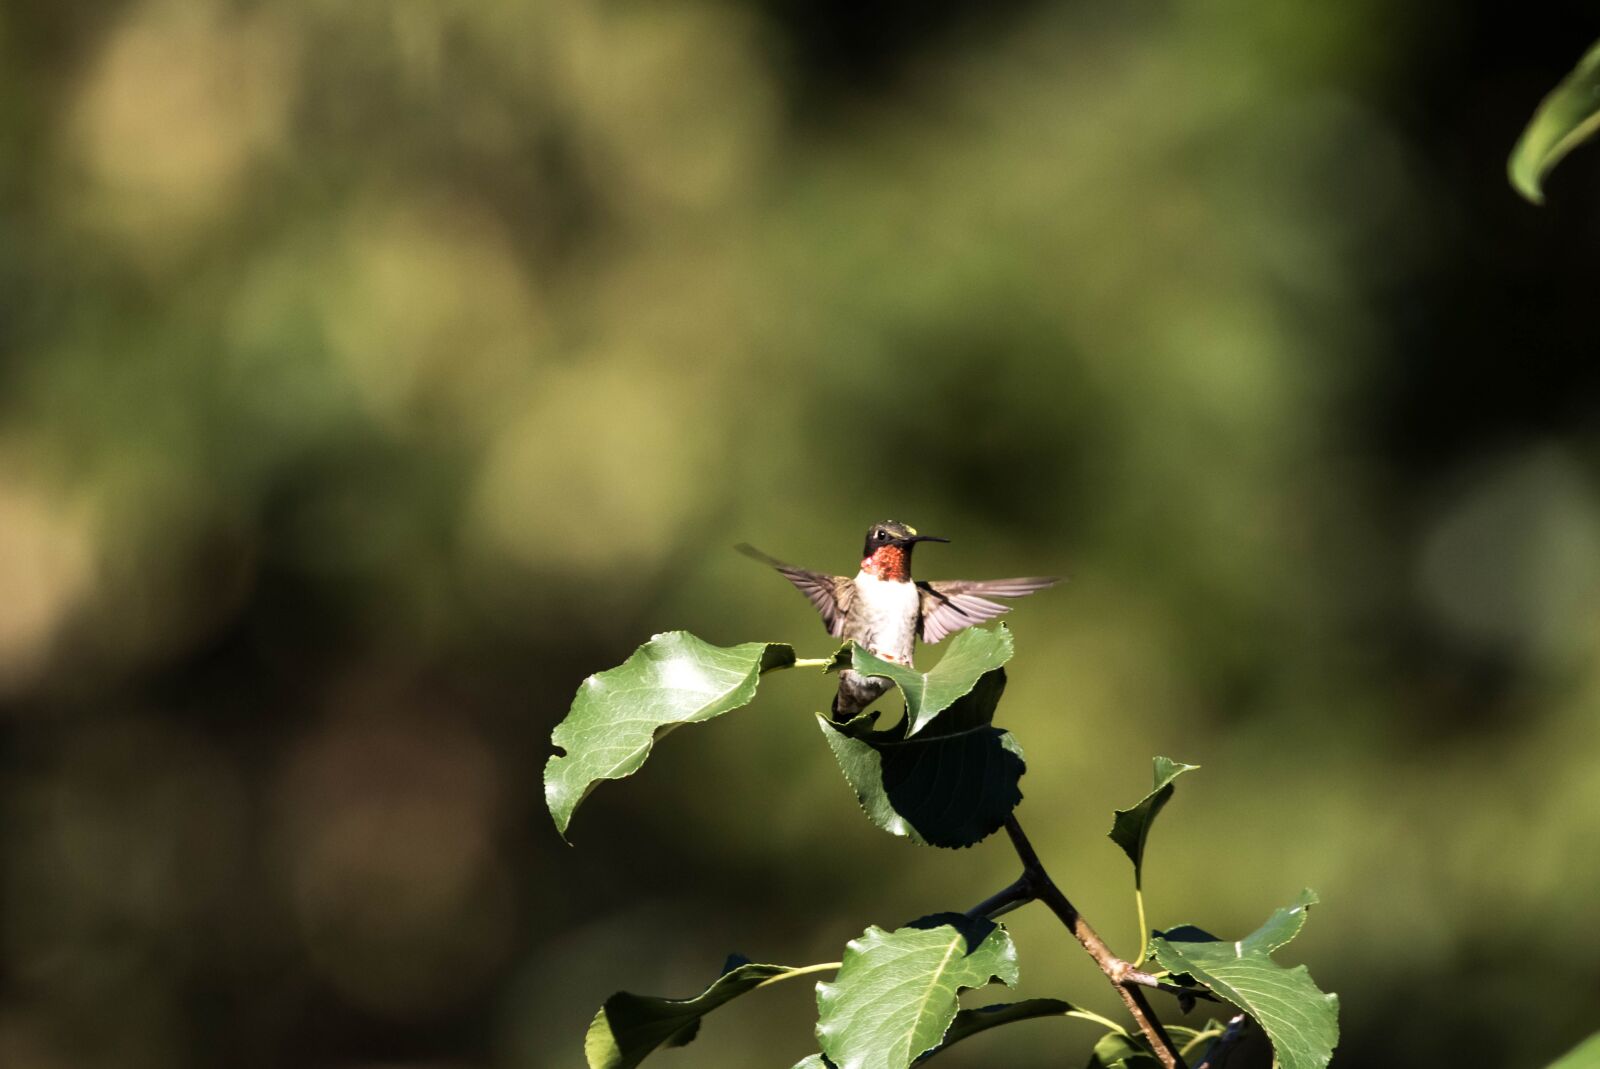 150-600mm F5-6.3 DG OS HSM | Contemporary 015 sample photo. Hummingbird, flying, nature photography